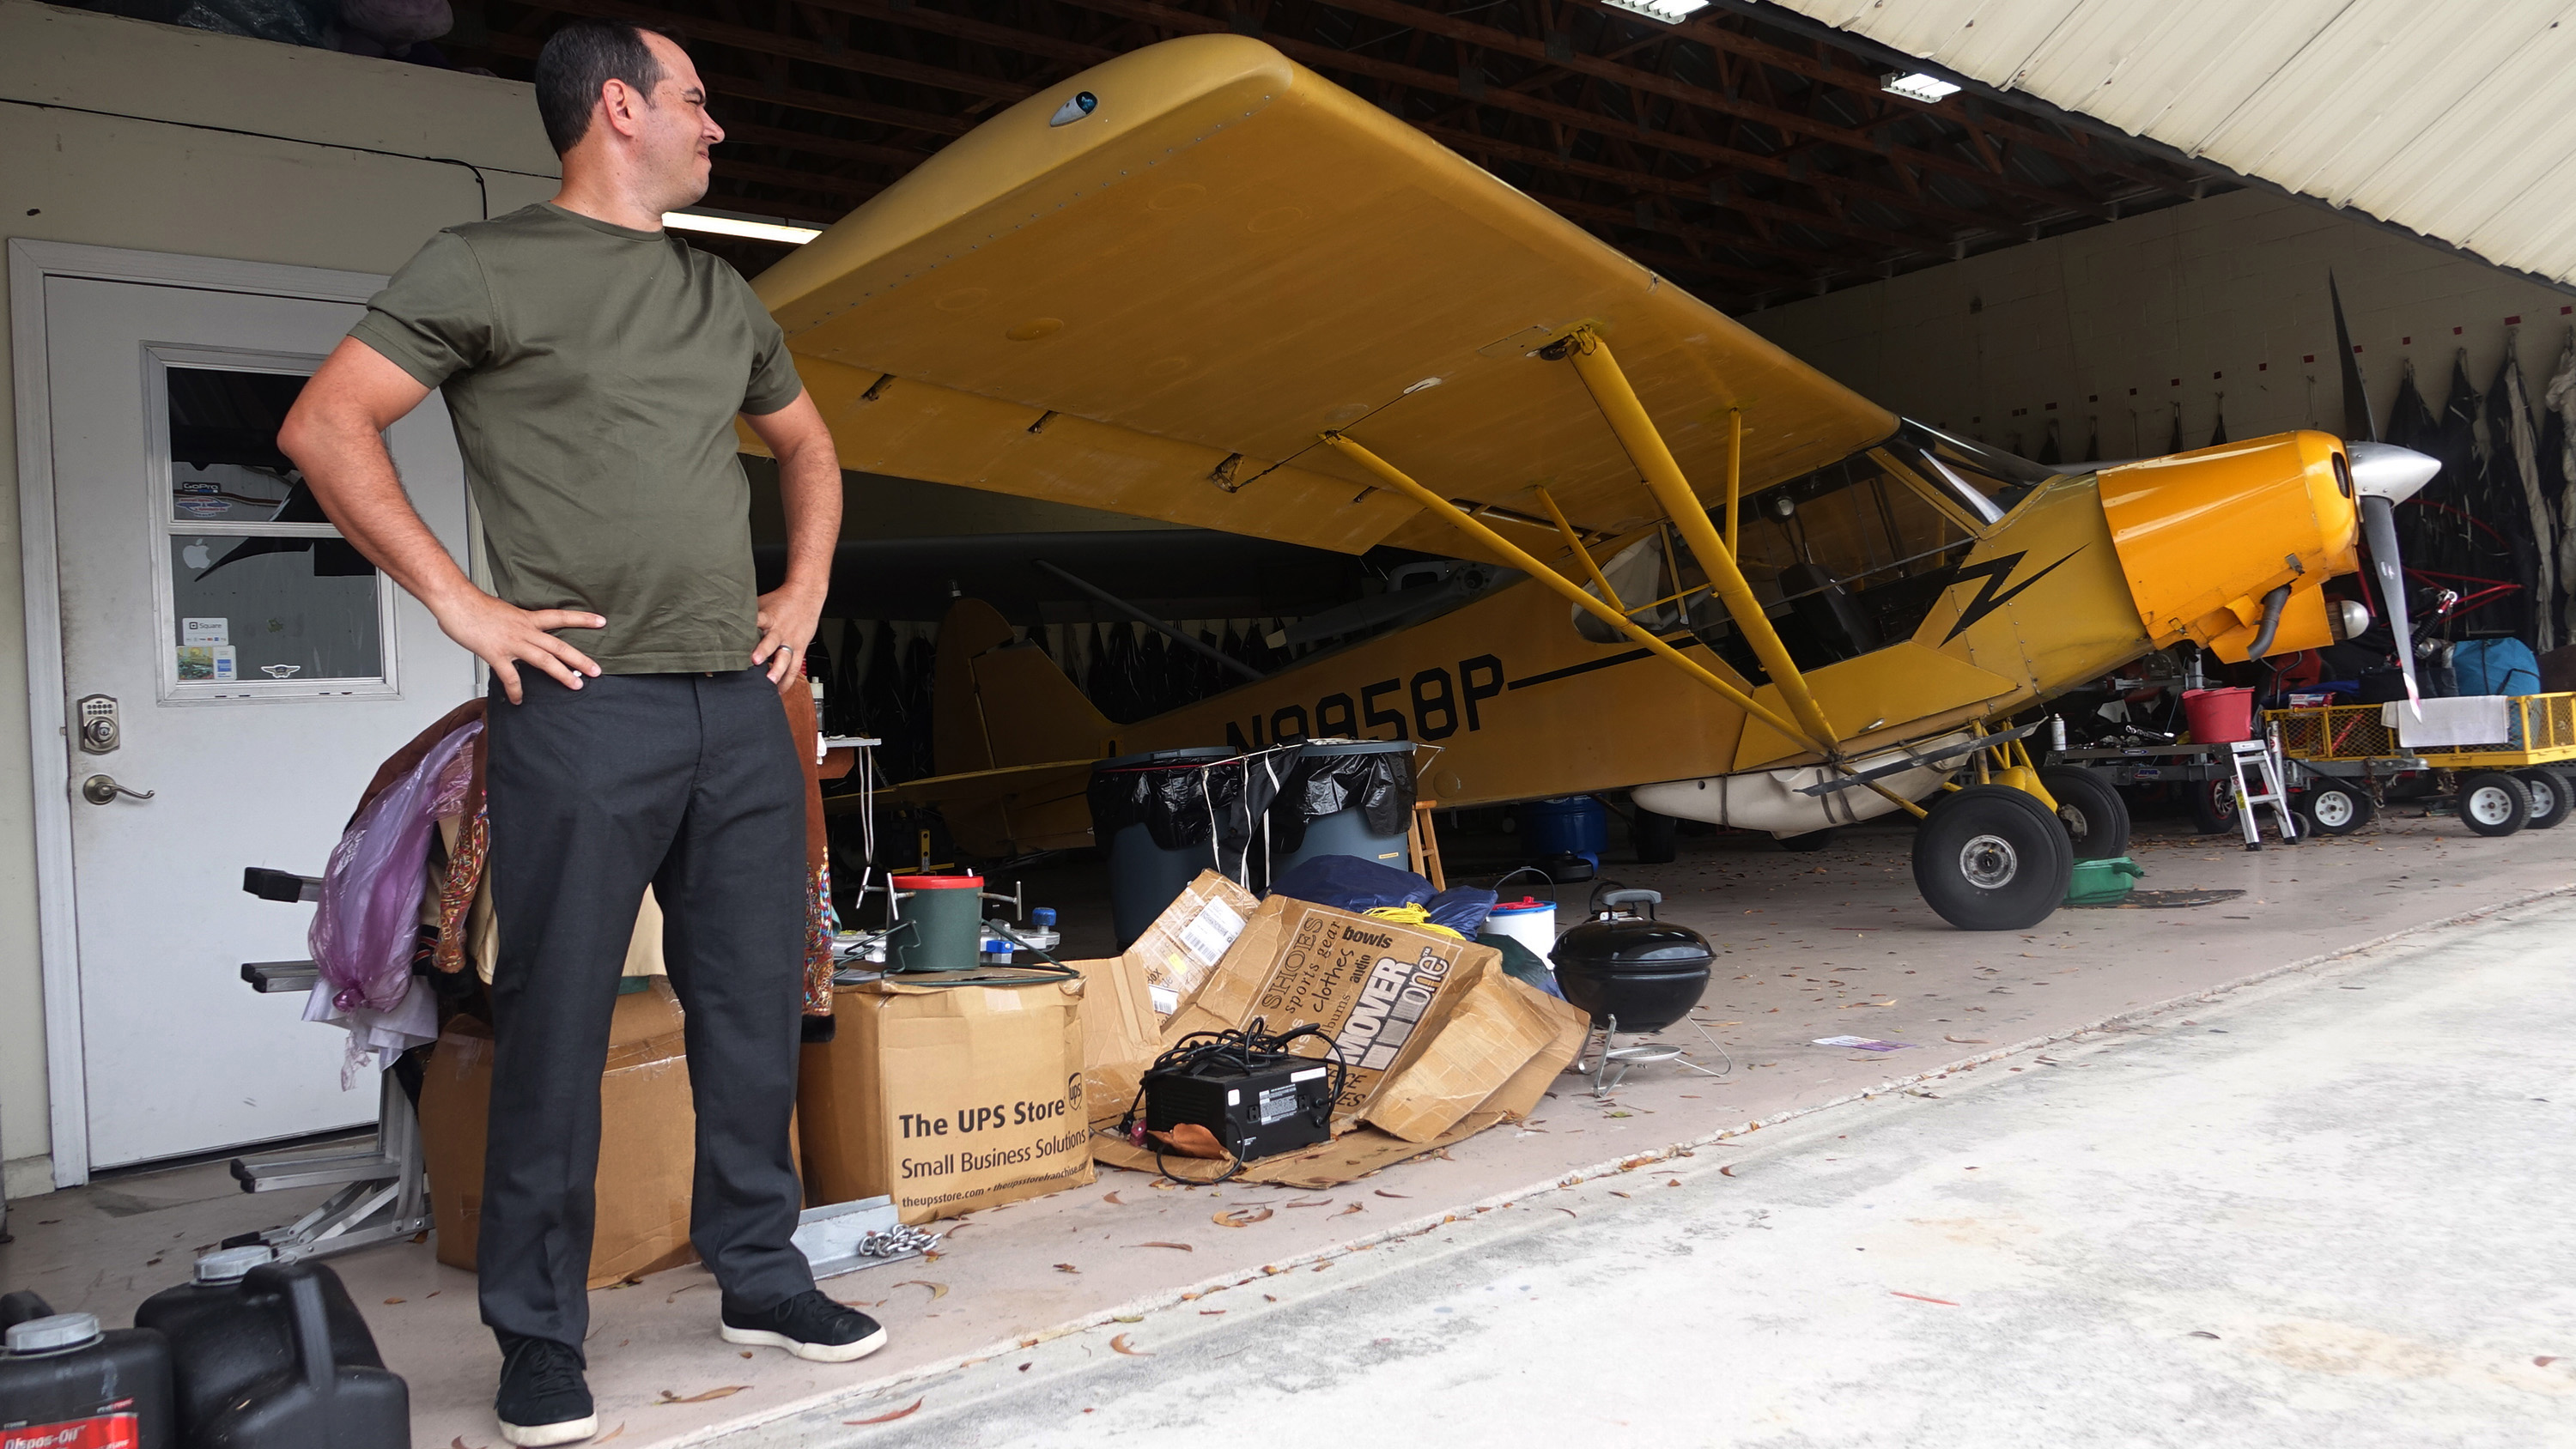 Jorge Gonzalez, of Skywords Advertising, is seen with his Piper Super Cub at the hangar he rents at Lantana Airport. Gonzalez said during a meeting with U.S. Rep. Lois Frankel that he might have to shutter his business if President Trump continues to visit Palm Beach and close the airspace on weekends. Courtesy of Joe Cavaretta, Fort Lauderdale Sun-Sentinel.